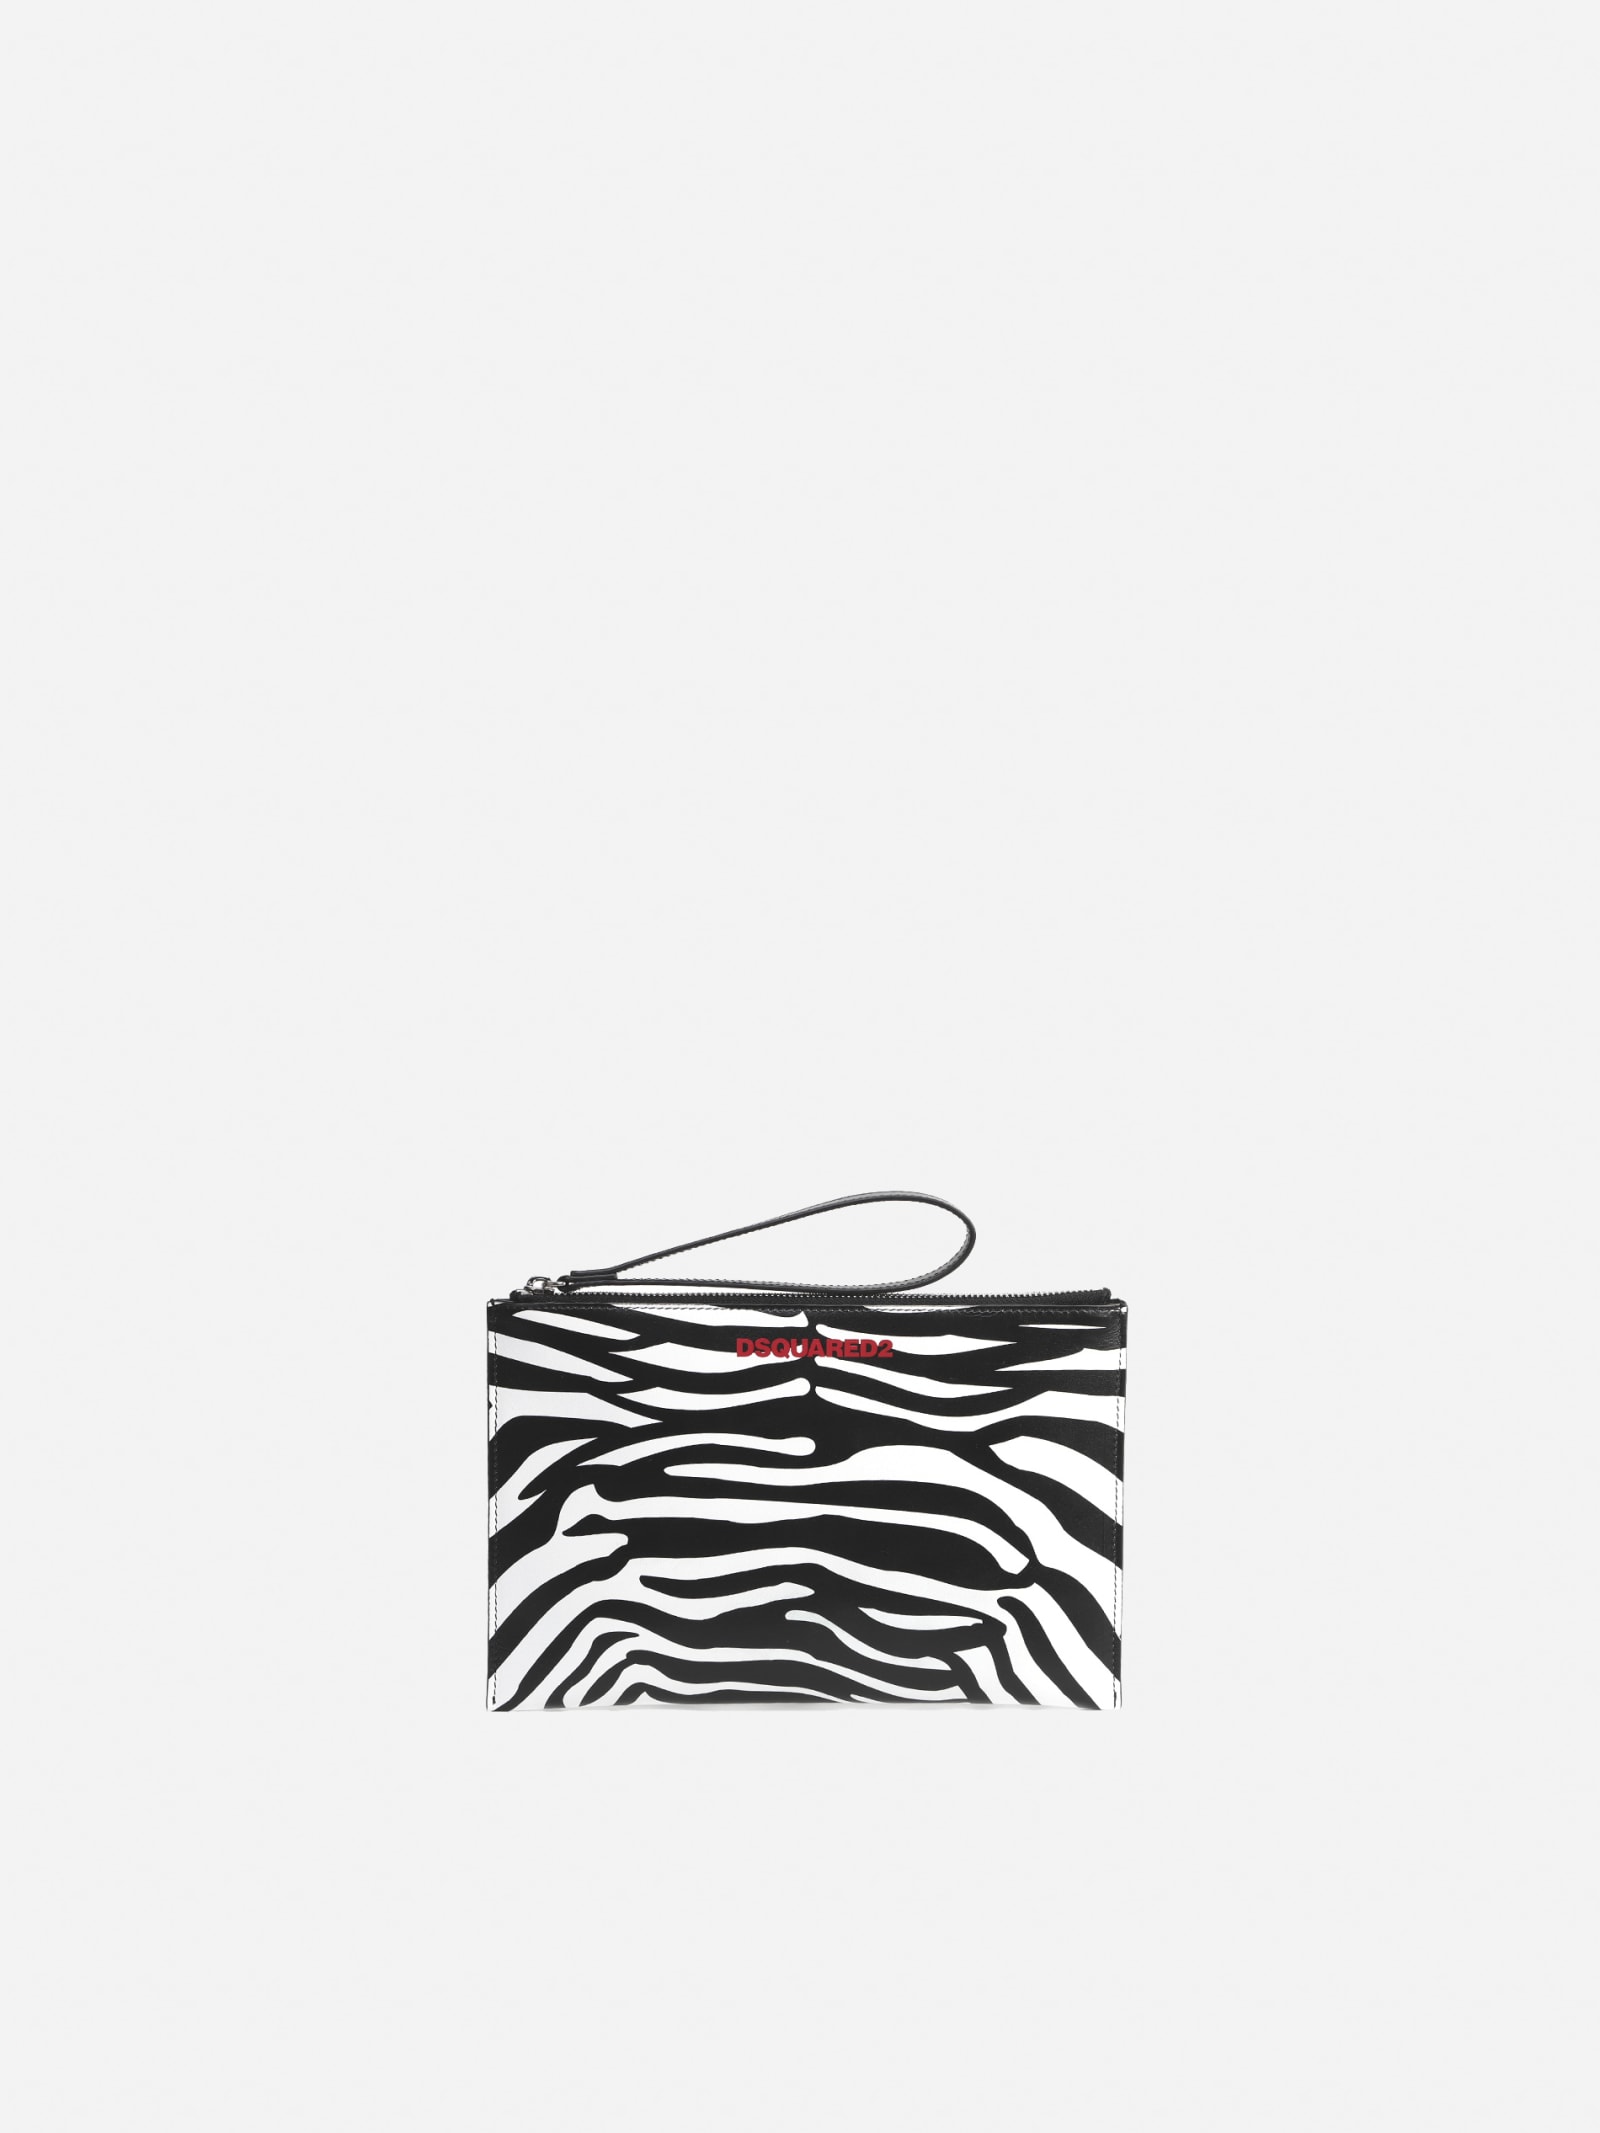 DSQUARED2 LEATHER CLUTCH BAG WITH ALL-OVER ZEBRA PRINT,POW0014 01504260M072